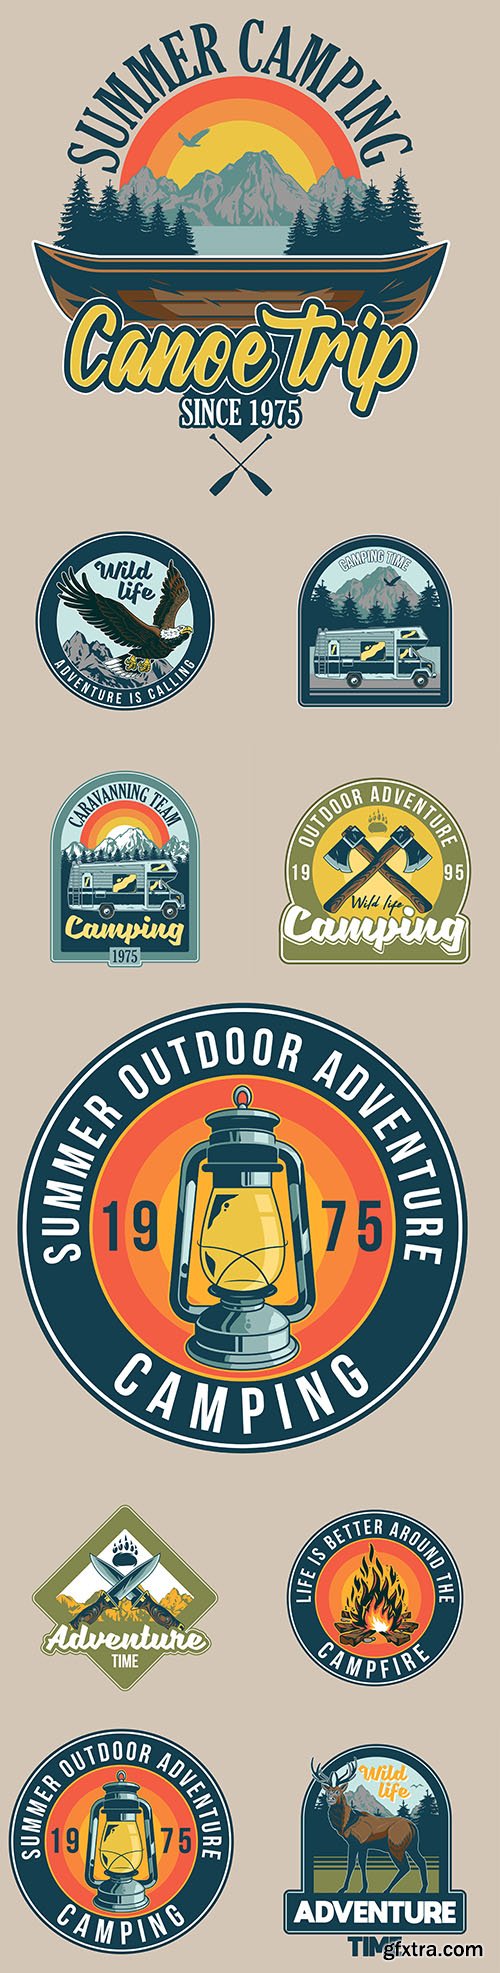 Summer camping and nature adventure vintage design